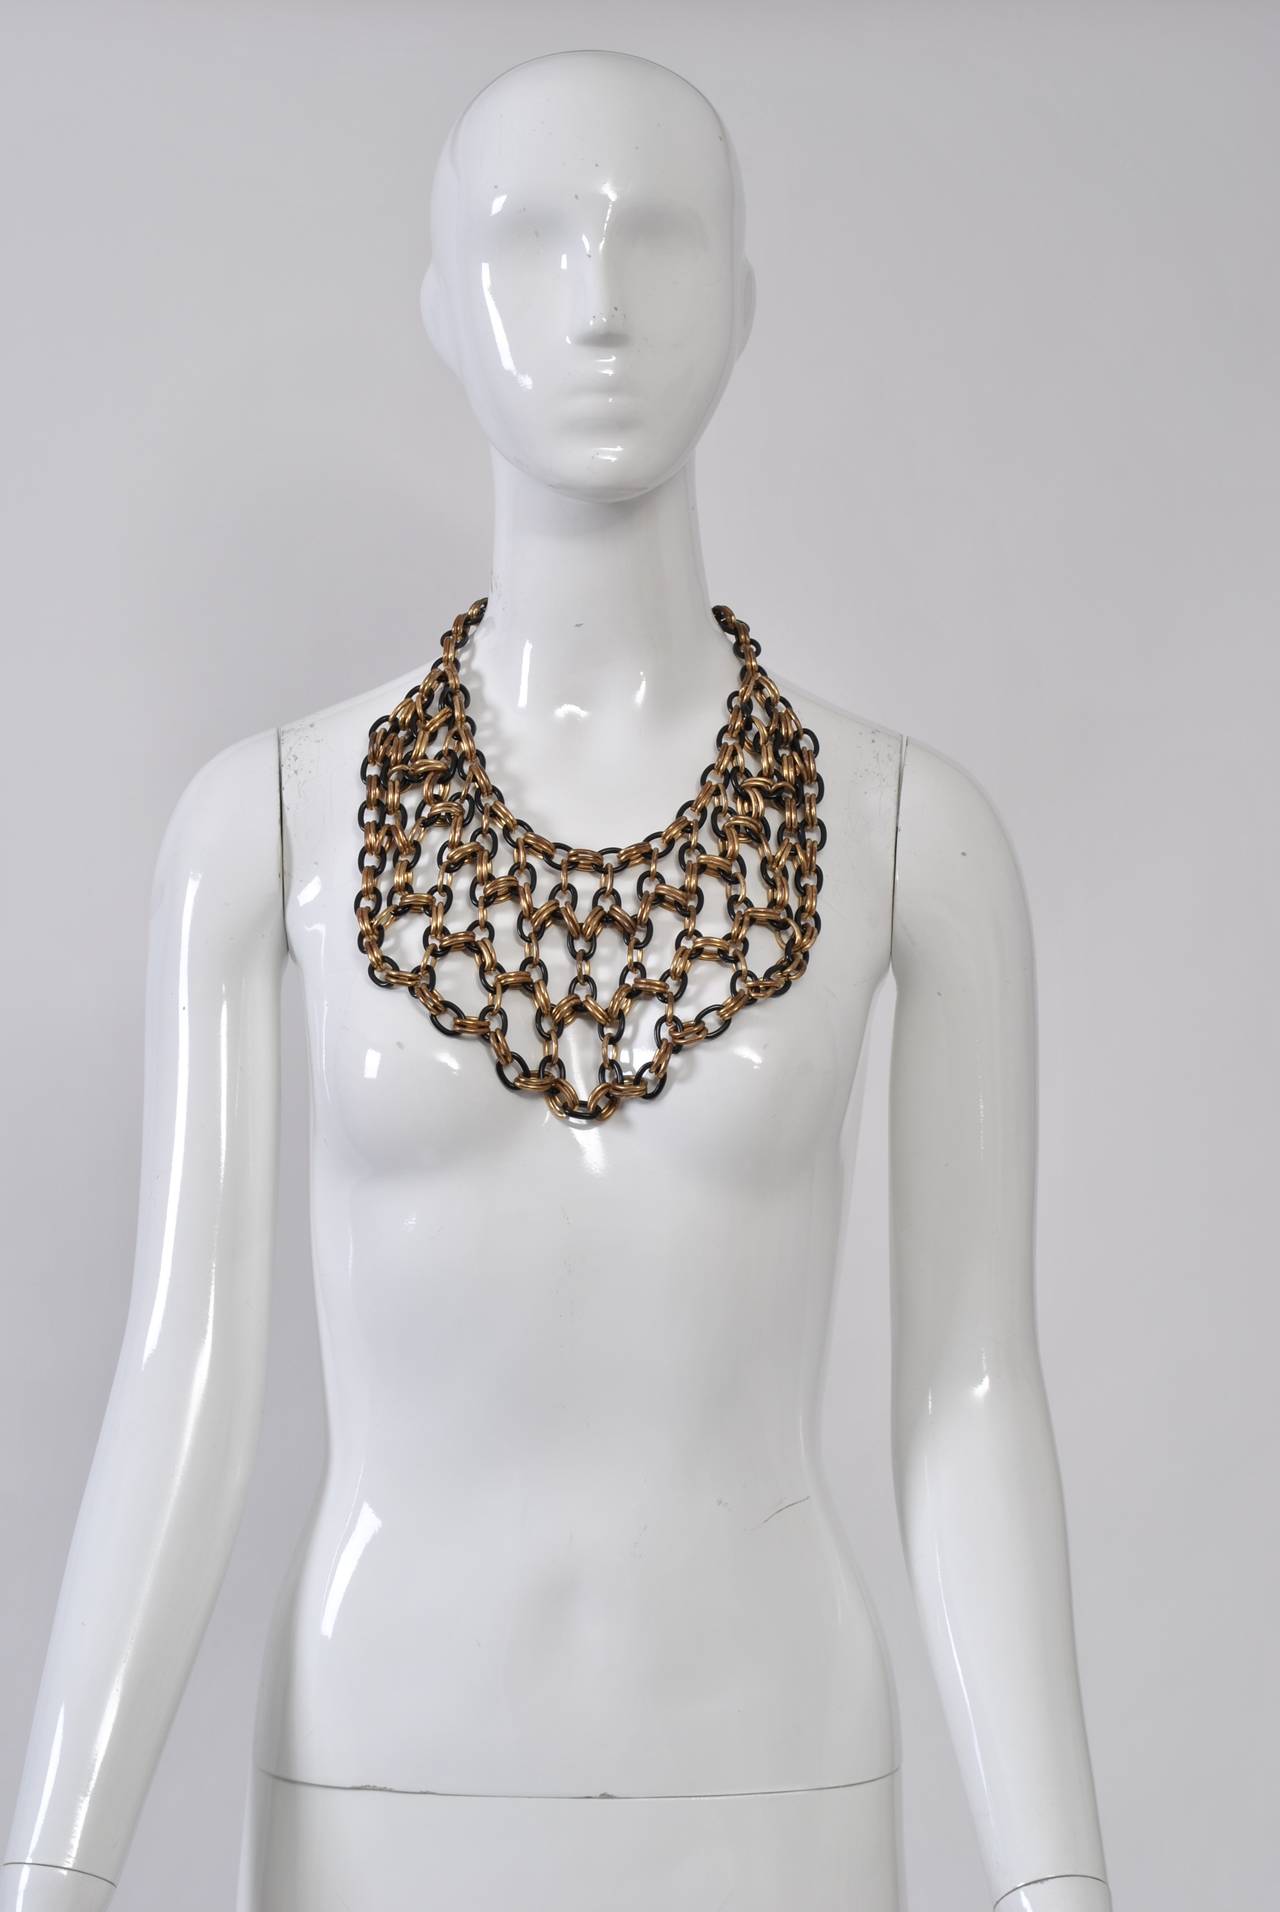 1980s bib necklace composed of alternating single black and double dark gold links. The necklace has a 5